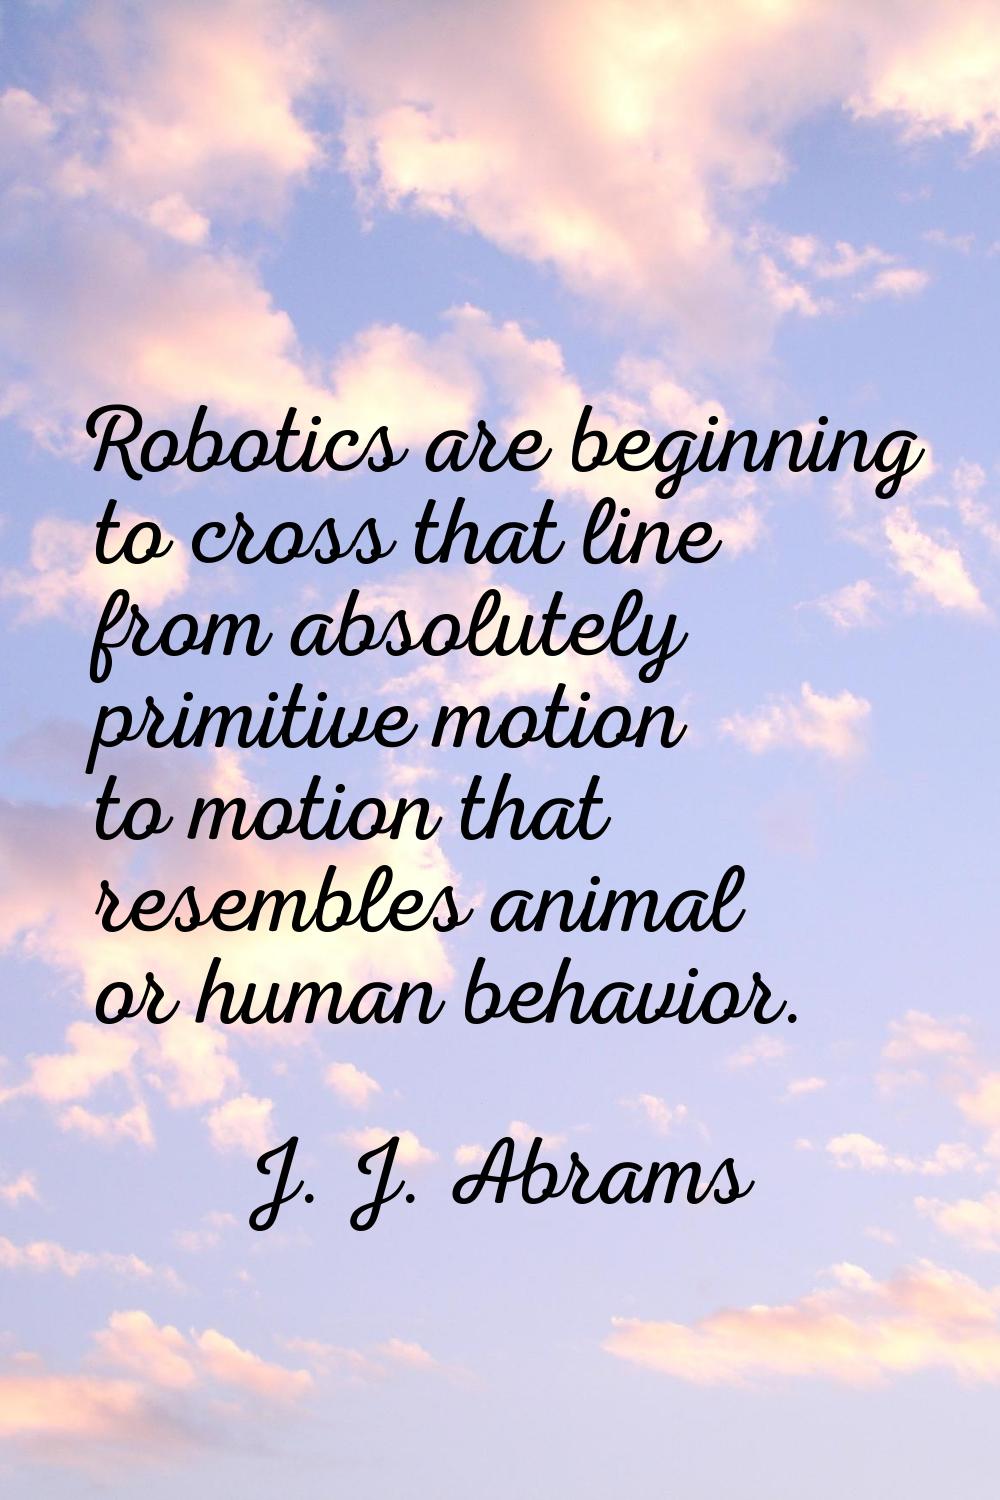 Robotics are beginning to cross that line from absolutely primitive motion to motion that resembles